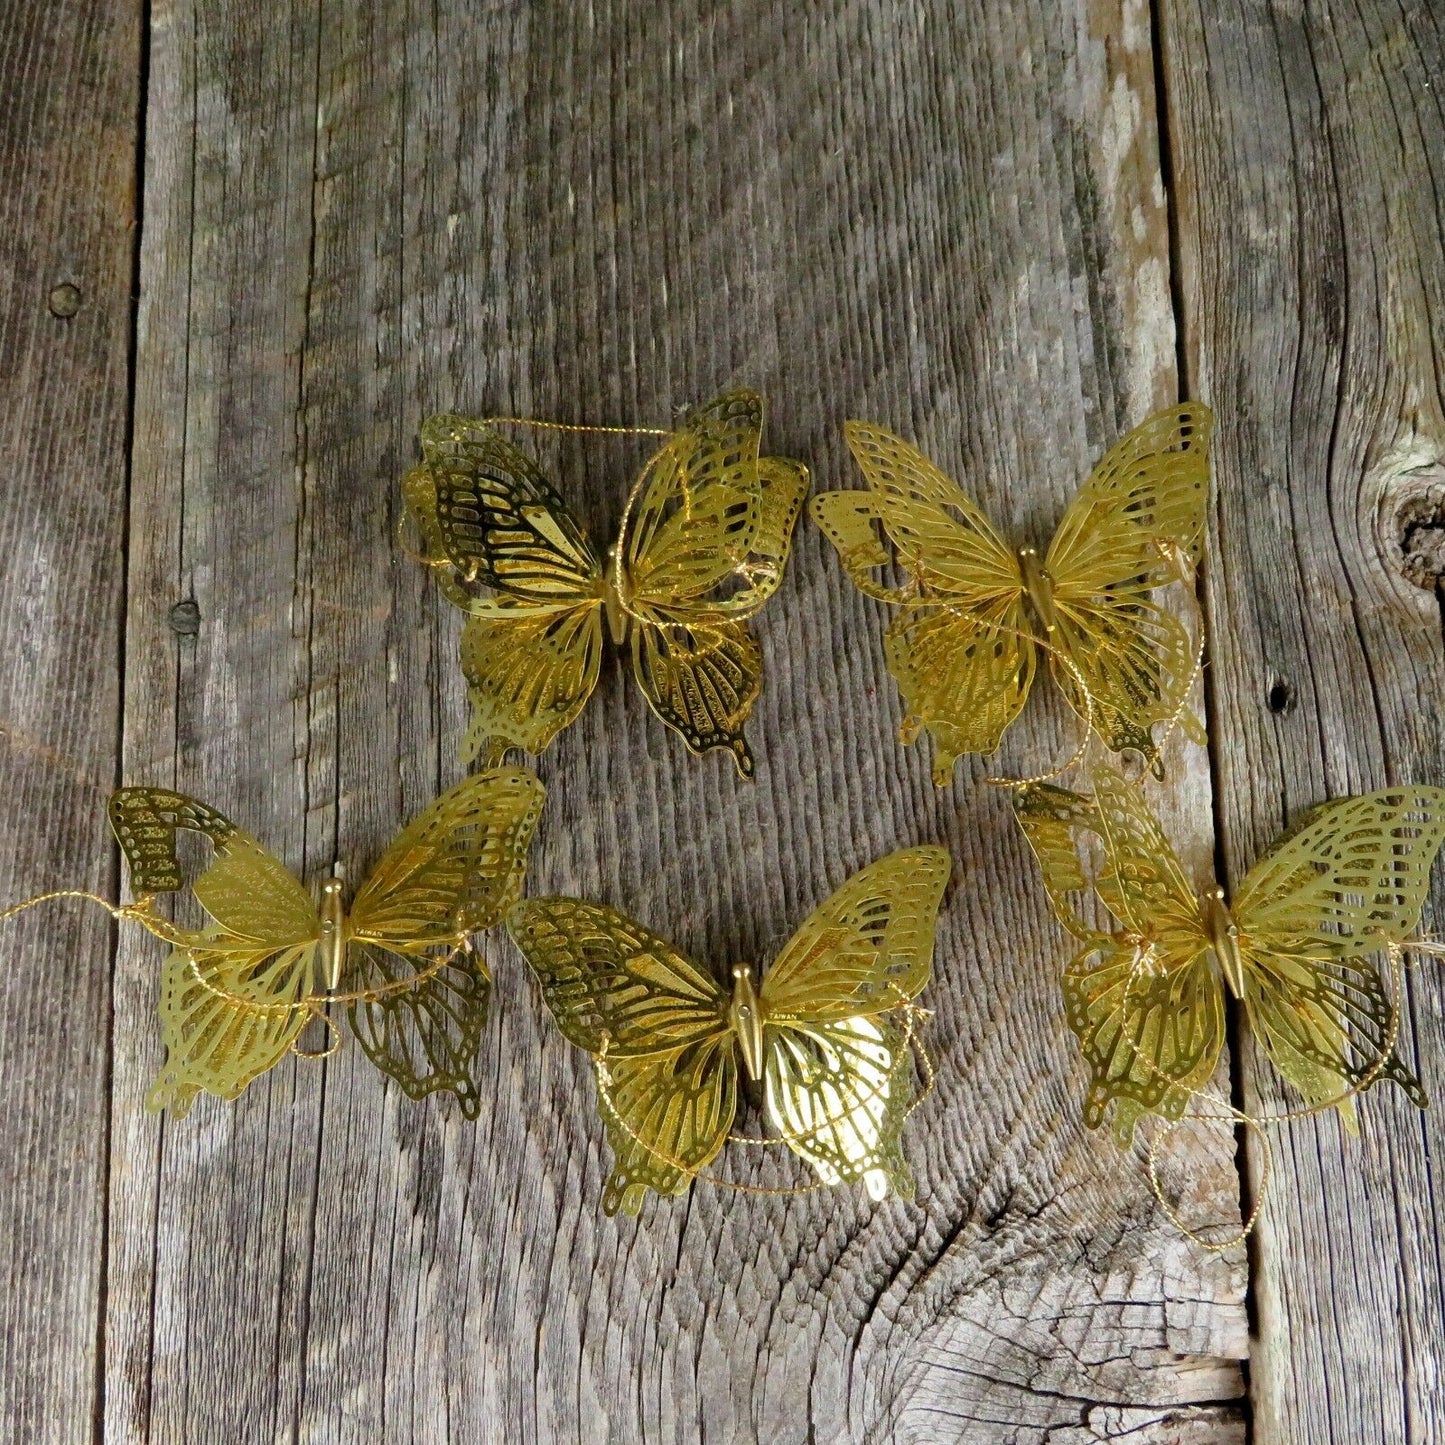 Vintage Butterfly Christmas Ornaments Metal Lot Gold Taiwan Mobile Decoration - At Grandma's Table